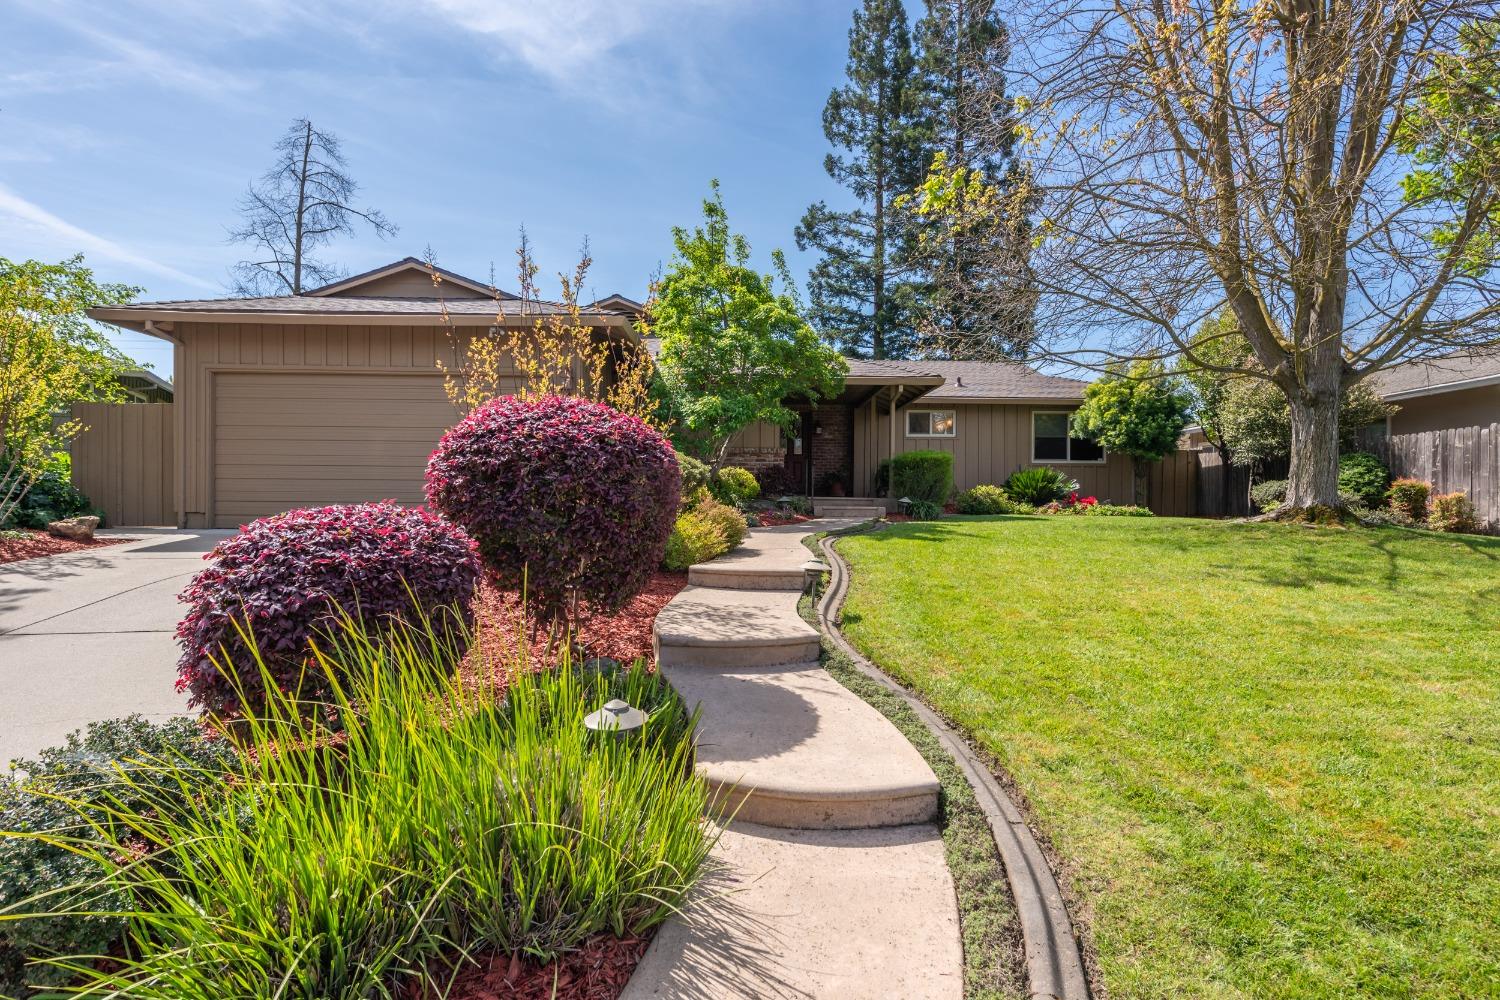 Photo of 4728 Bowerwood Dr in Carmichael, CA